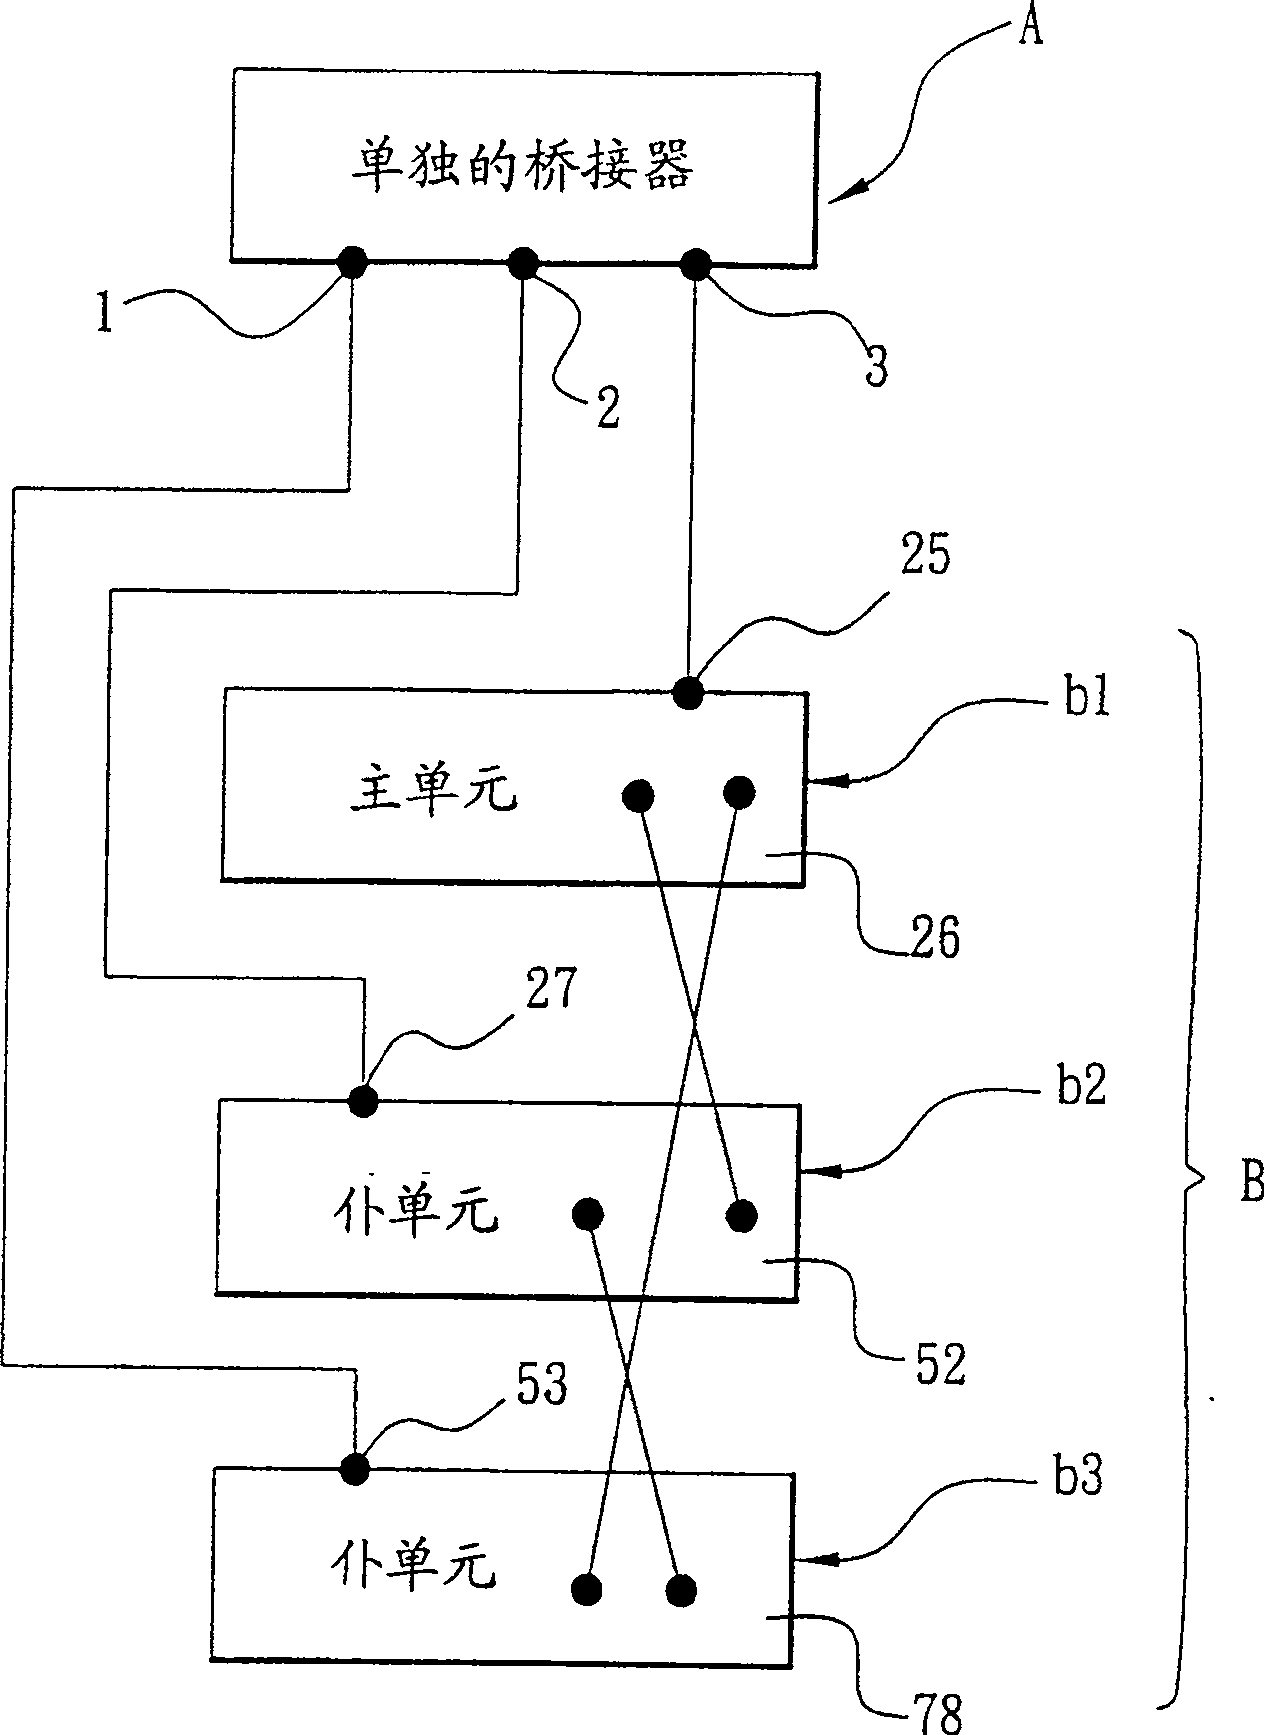 Method for processing each unit according to rapid expanded tree protocol in stack type network device